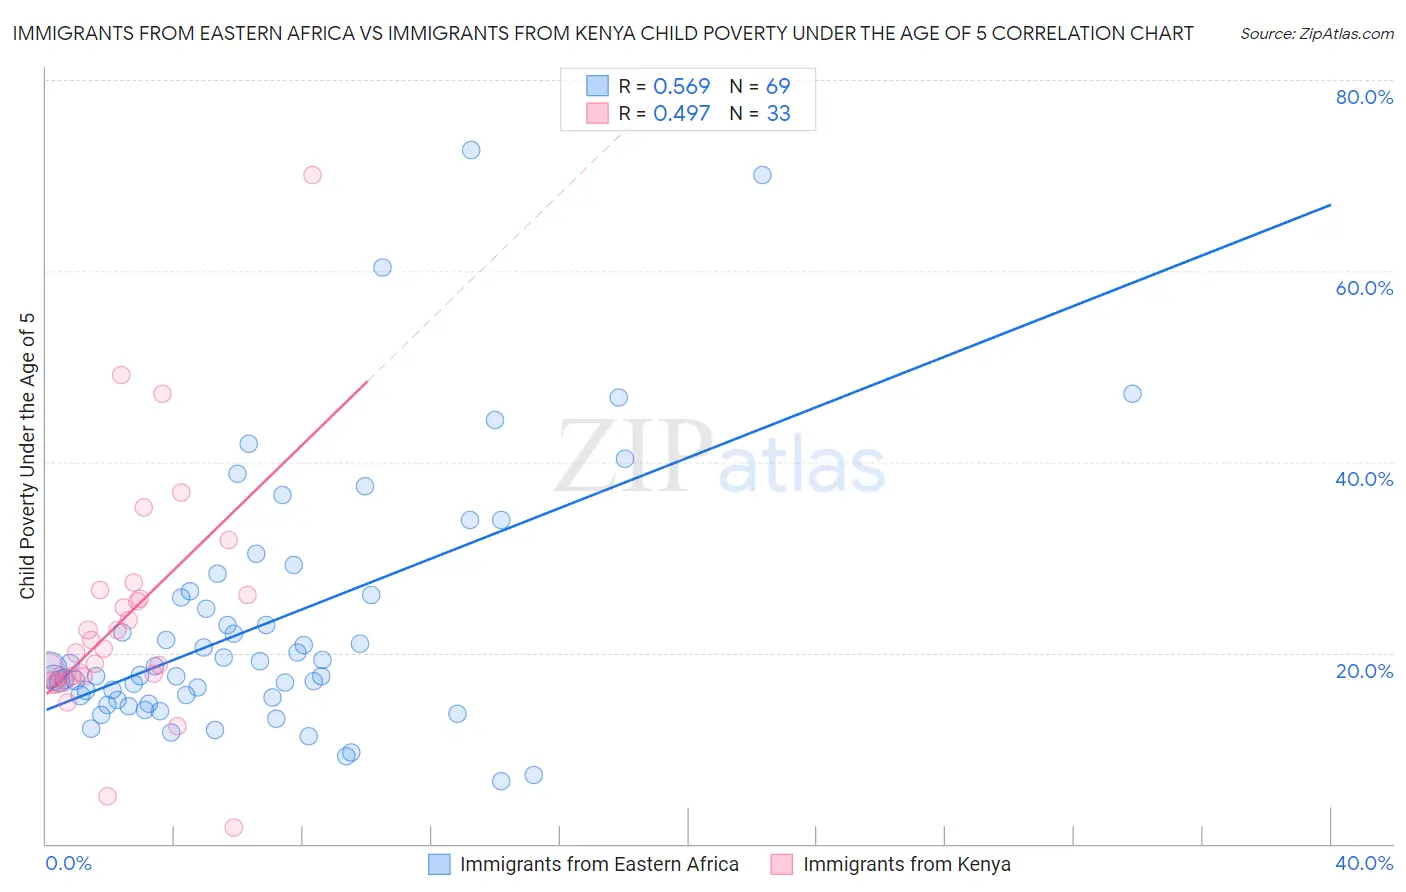 Immigrants from Eastern Africa vs Immigrants from Kenya Child Poverty Under the Age of 5